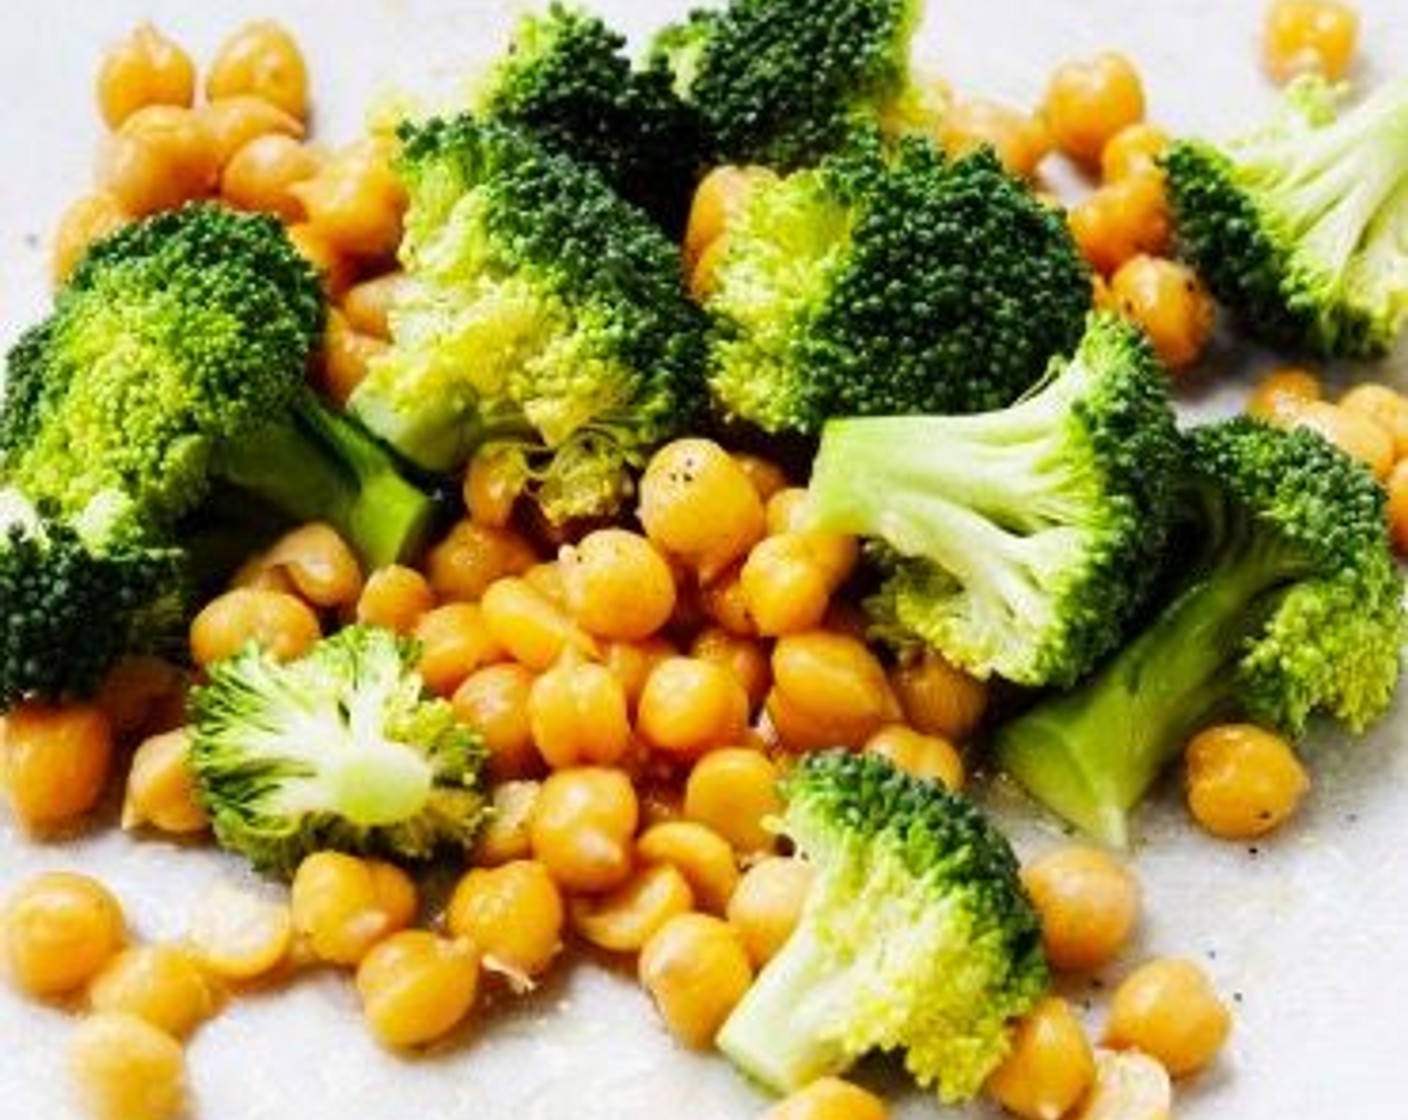 step 2 Toss together the Dried Chickpeas (1 cup), Broccoli Florets (1 cup), Extra-Virgin Olive Oil (1 Tbsp), juice from the Lemon (1/2), Kosher Salt (to taste), and Freshly Ground Black Pepper (to taste).